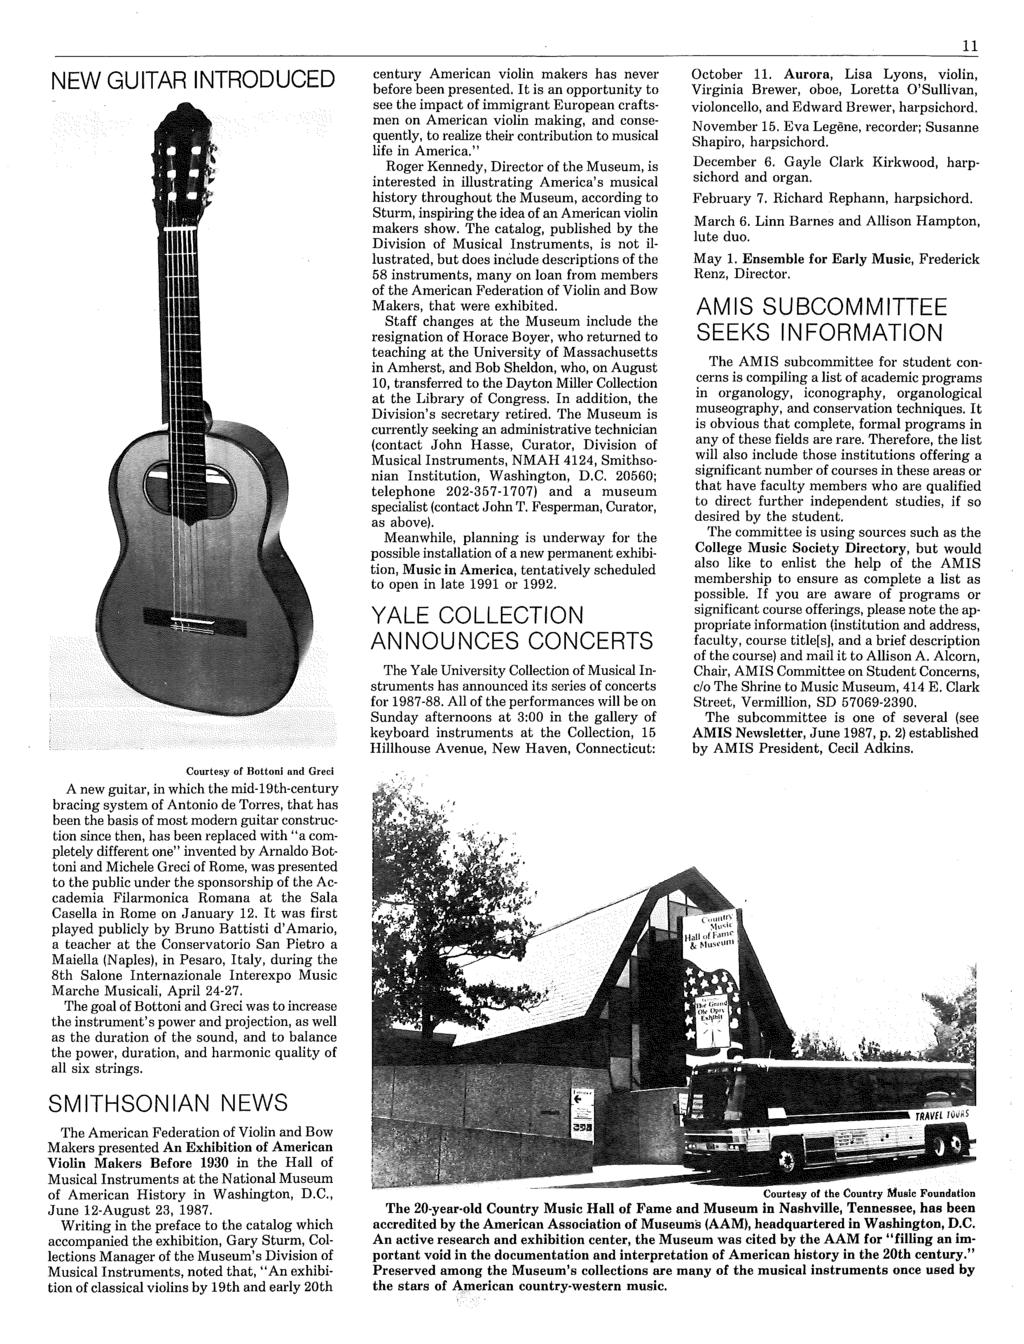 NEW GUITAR INTRODUCED Courtesy of Bottoni and Greci A new guitar, in which the mid-19th-century bracing system of Antonio de Torres, that has been the basis of most modern guitar construction since